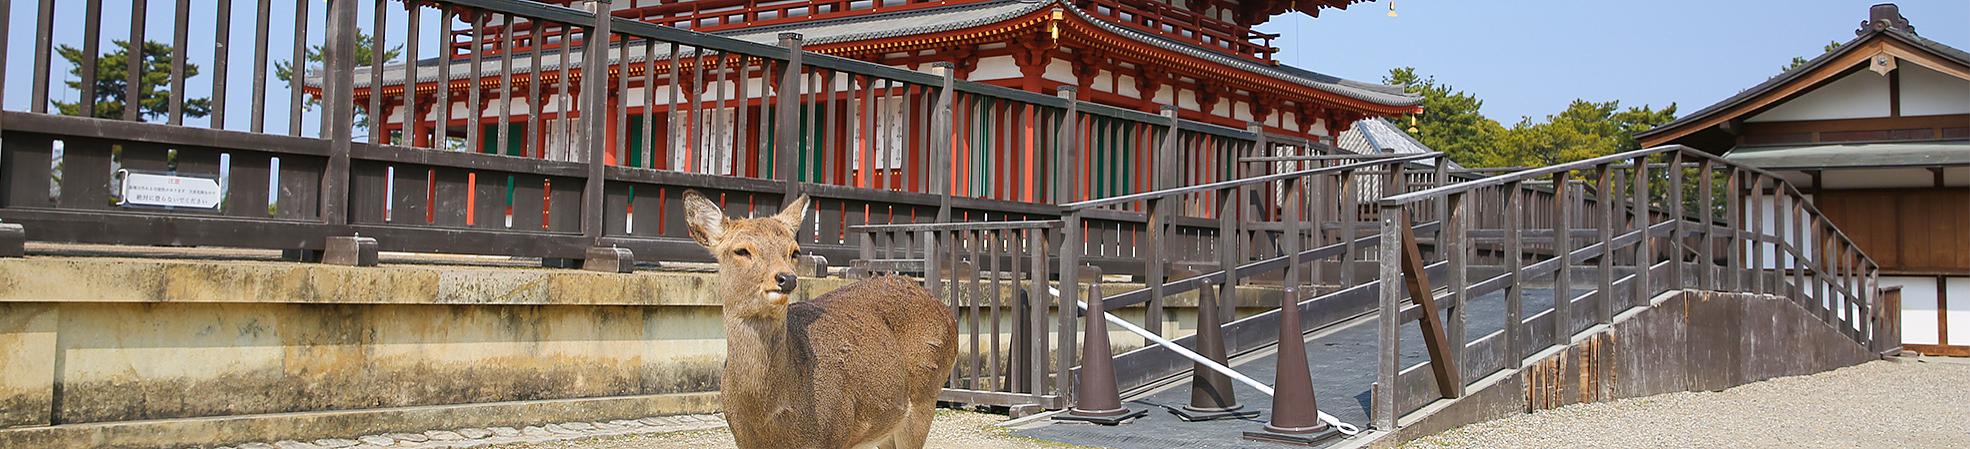 A Complete Guide to Visiting Nara